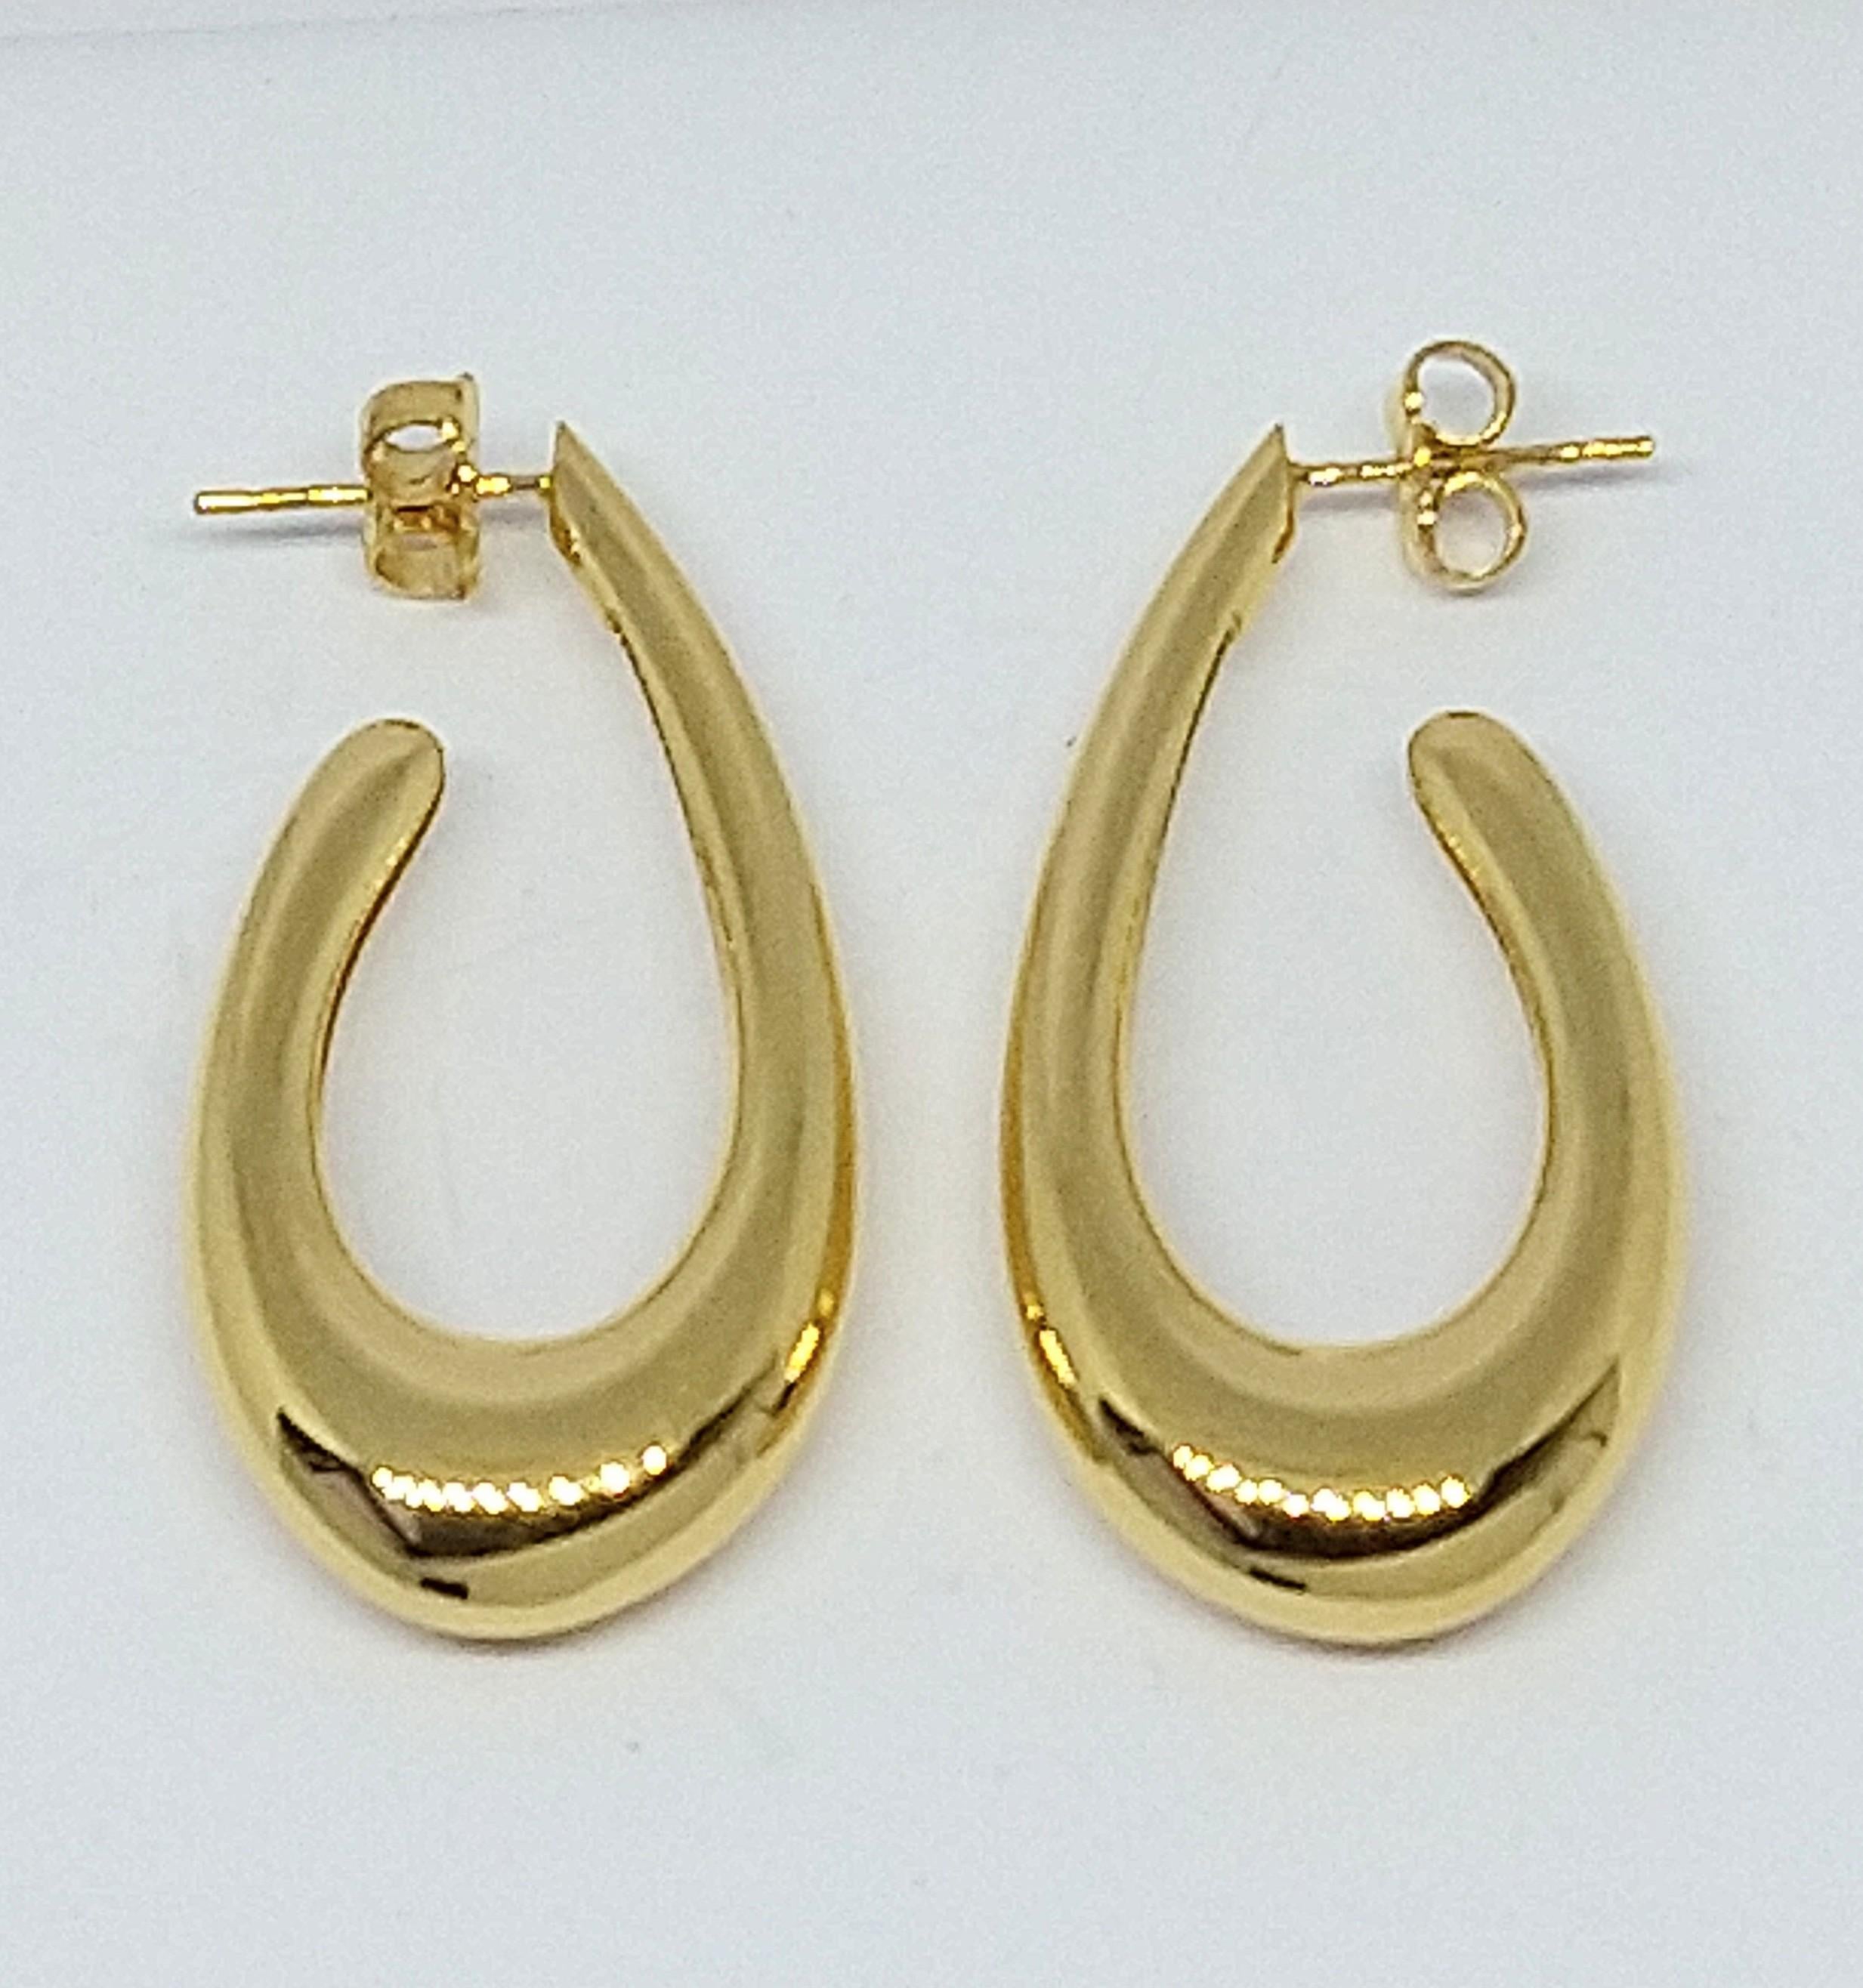 18 Karat Yellow Gold Teardrop Hollow Hoop Earring,  1 5/16 inch high x 5/8 inch wide. From the Teardrop Series. Inspired from Jean Arp, the French sculptor. From his clean ,soft sexy lines in his sculptures.  Though the times we live in may get us